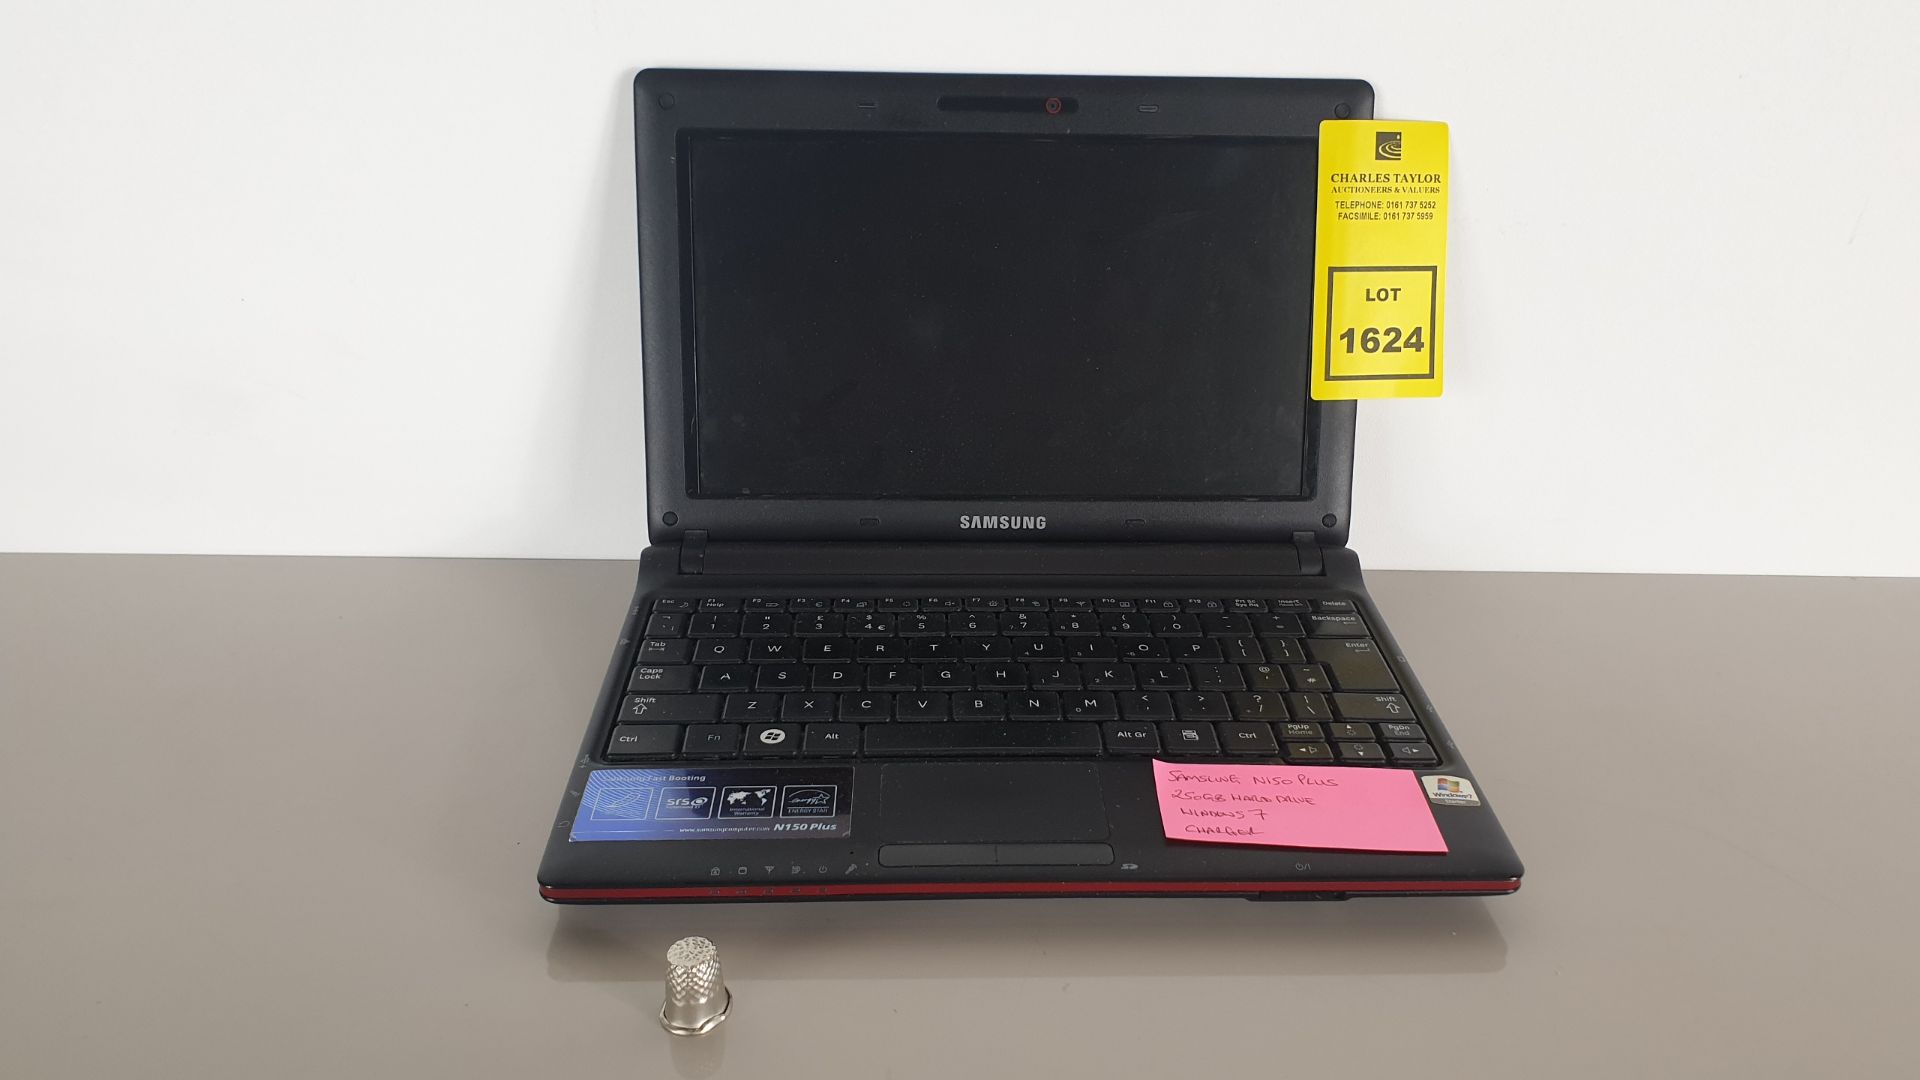 (LOT FOR THURSDAY 28TH MAY AUCTION) SAMSUNG N150 PLUS NETBOOK - 250 GB HARD DRIVE WITH WINDOWS 7 (